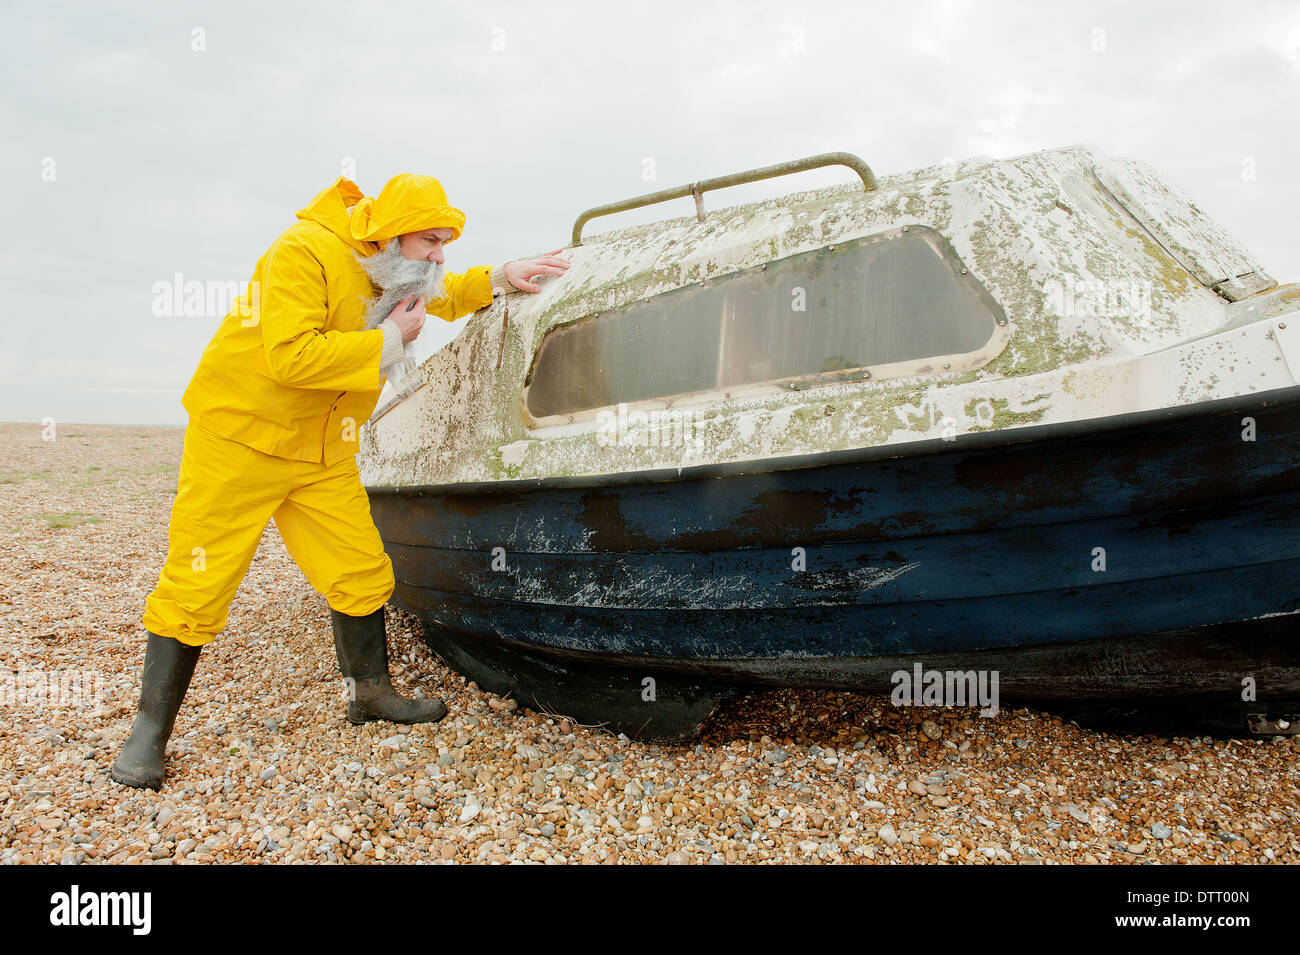 Fisherman in yellow water-proof overalls, checking for damage on an old boat. Stock Photo